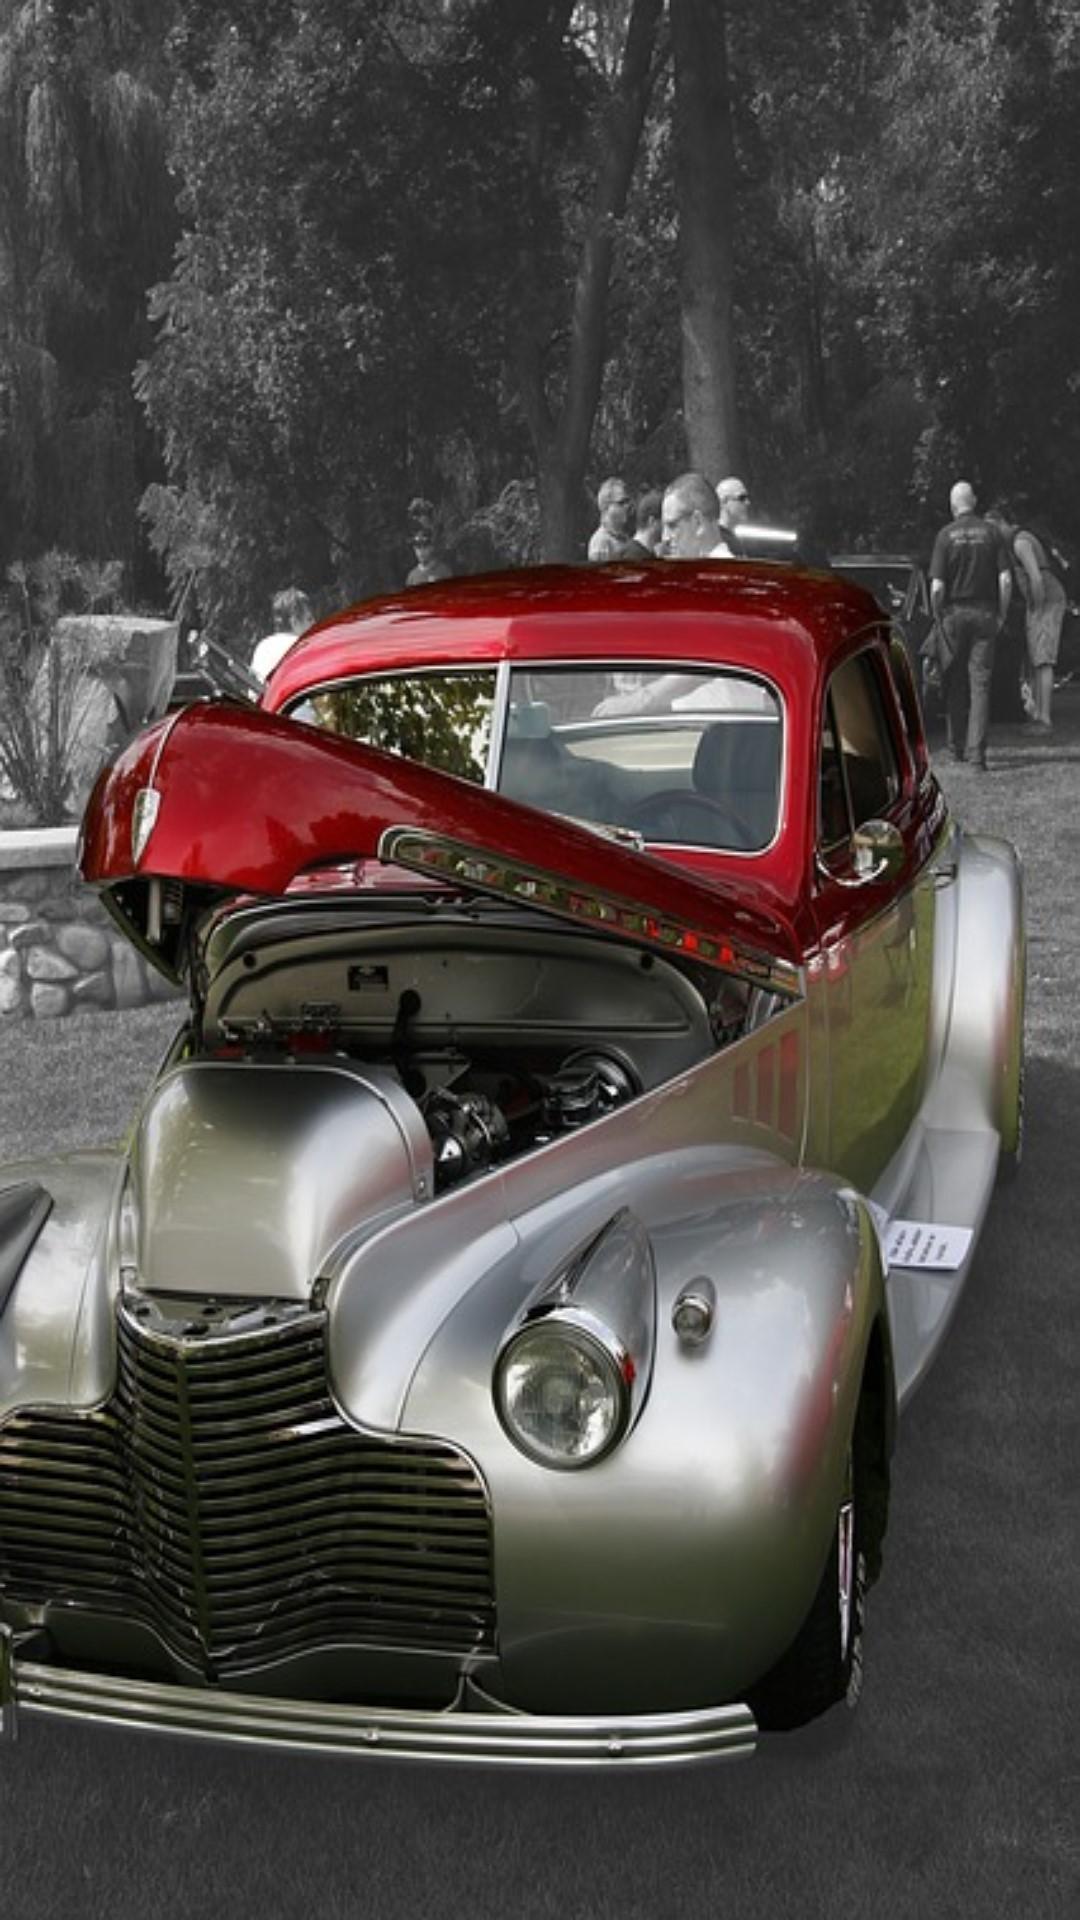 Cool Old Car Hd Wallpaper For Android Apk Download